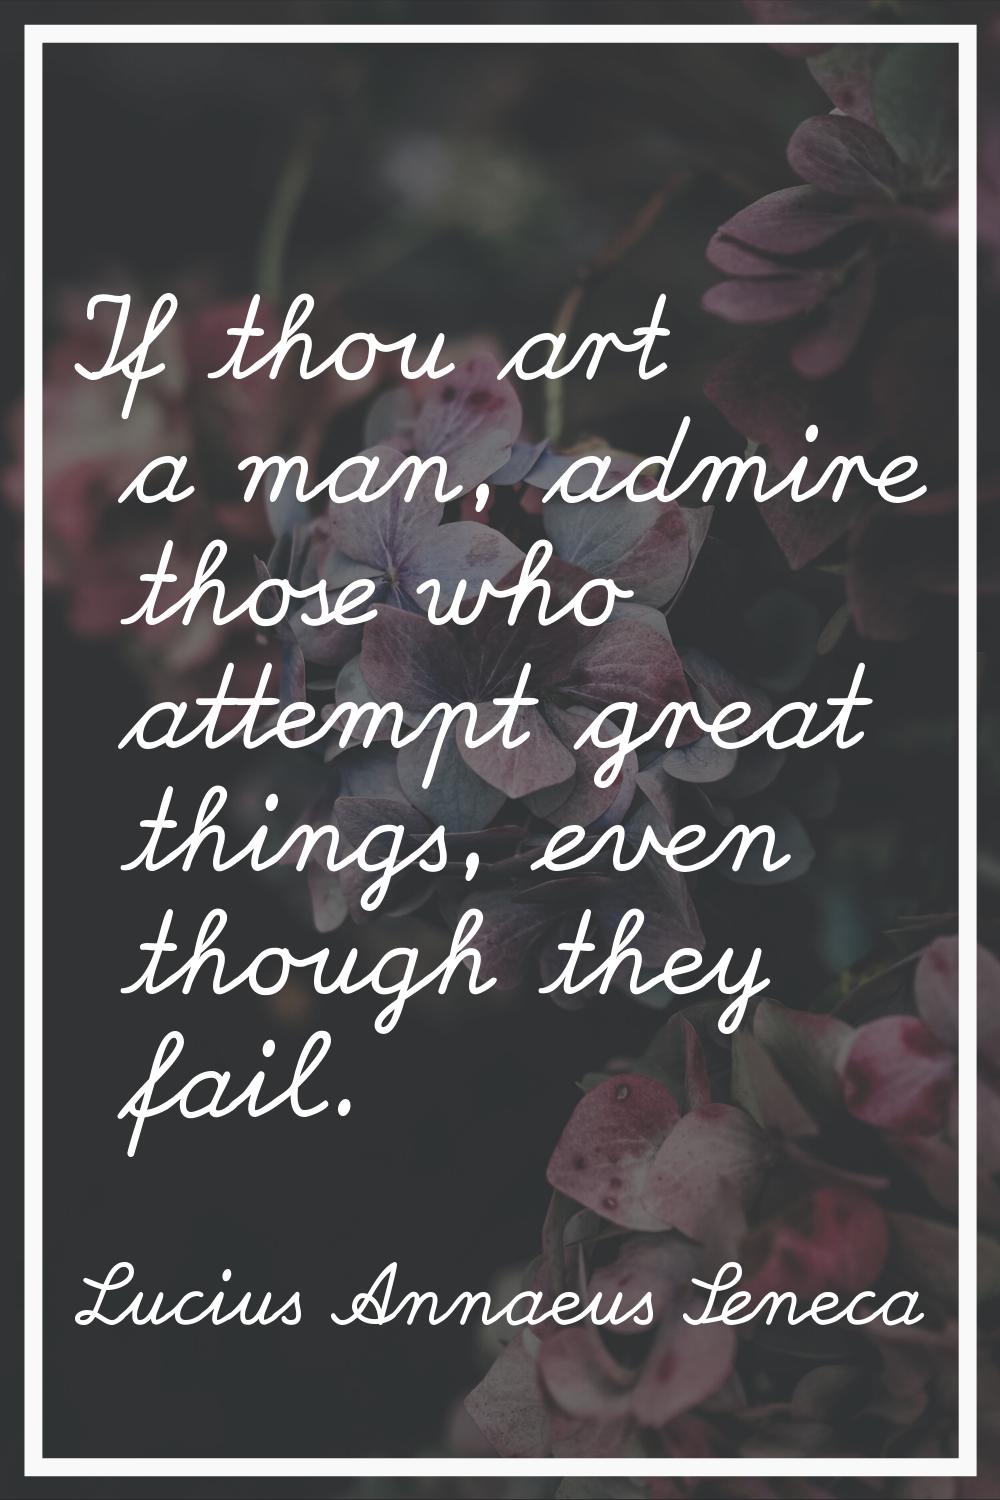 If thou art a man, admire those who attempt great things, even though they fail.